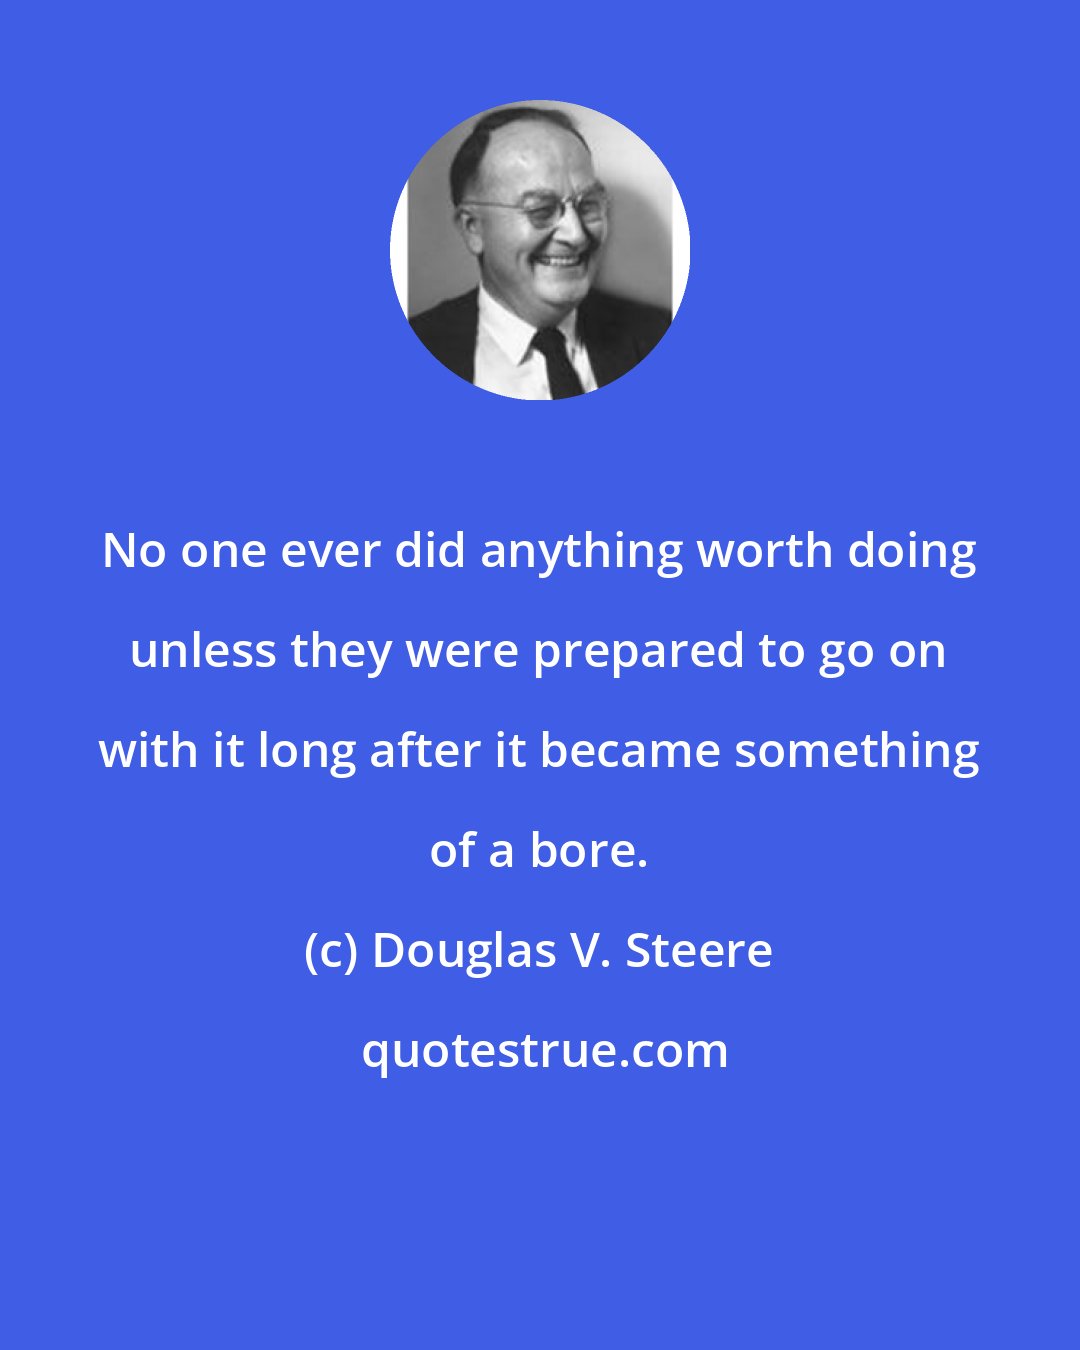 Douglas V. Steere: No one ever did anything worth doing unless they were prepared to go on with it long after it became something of a bore.